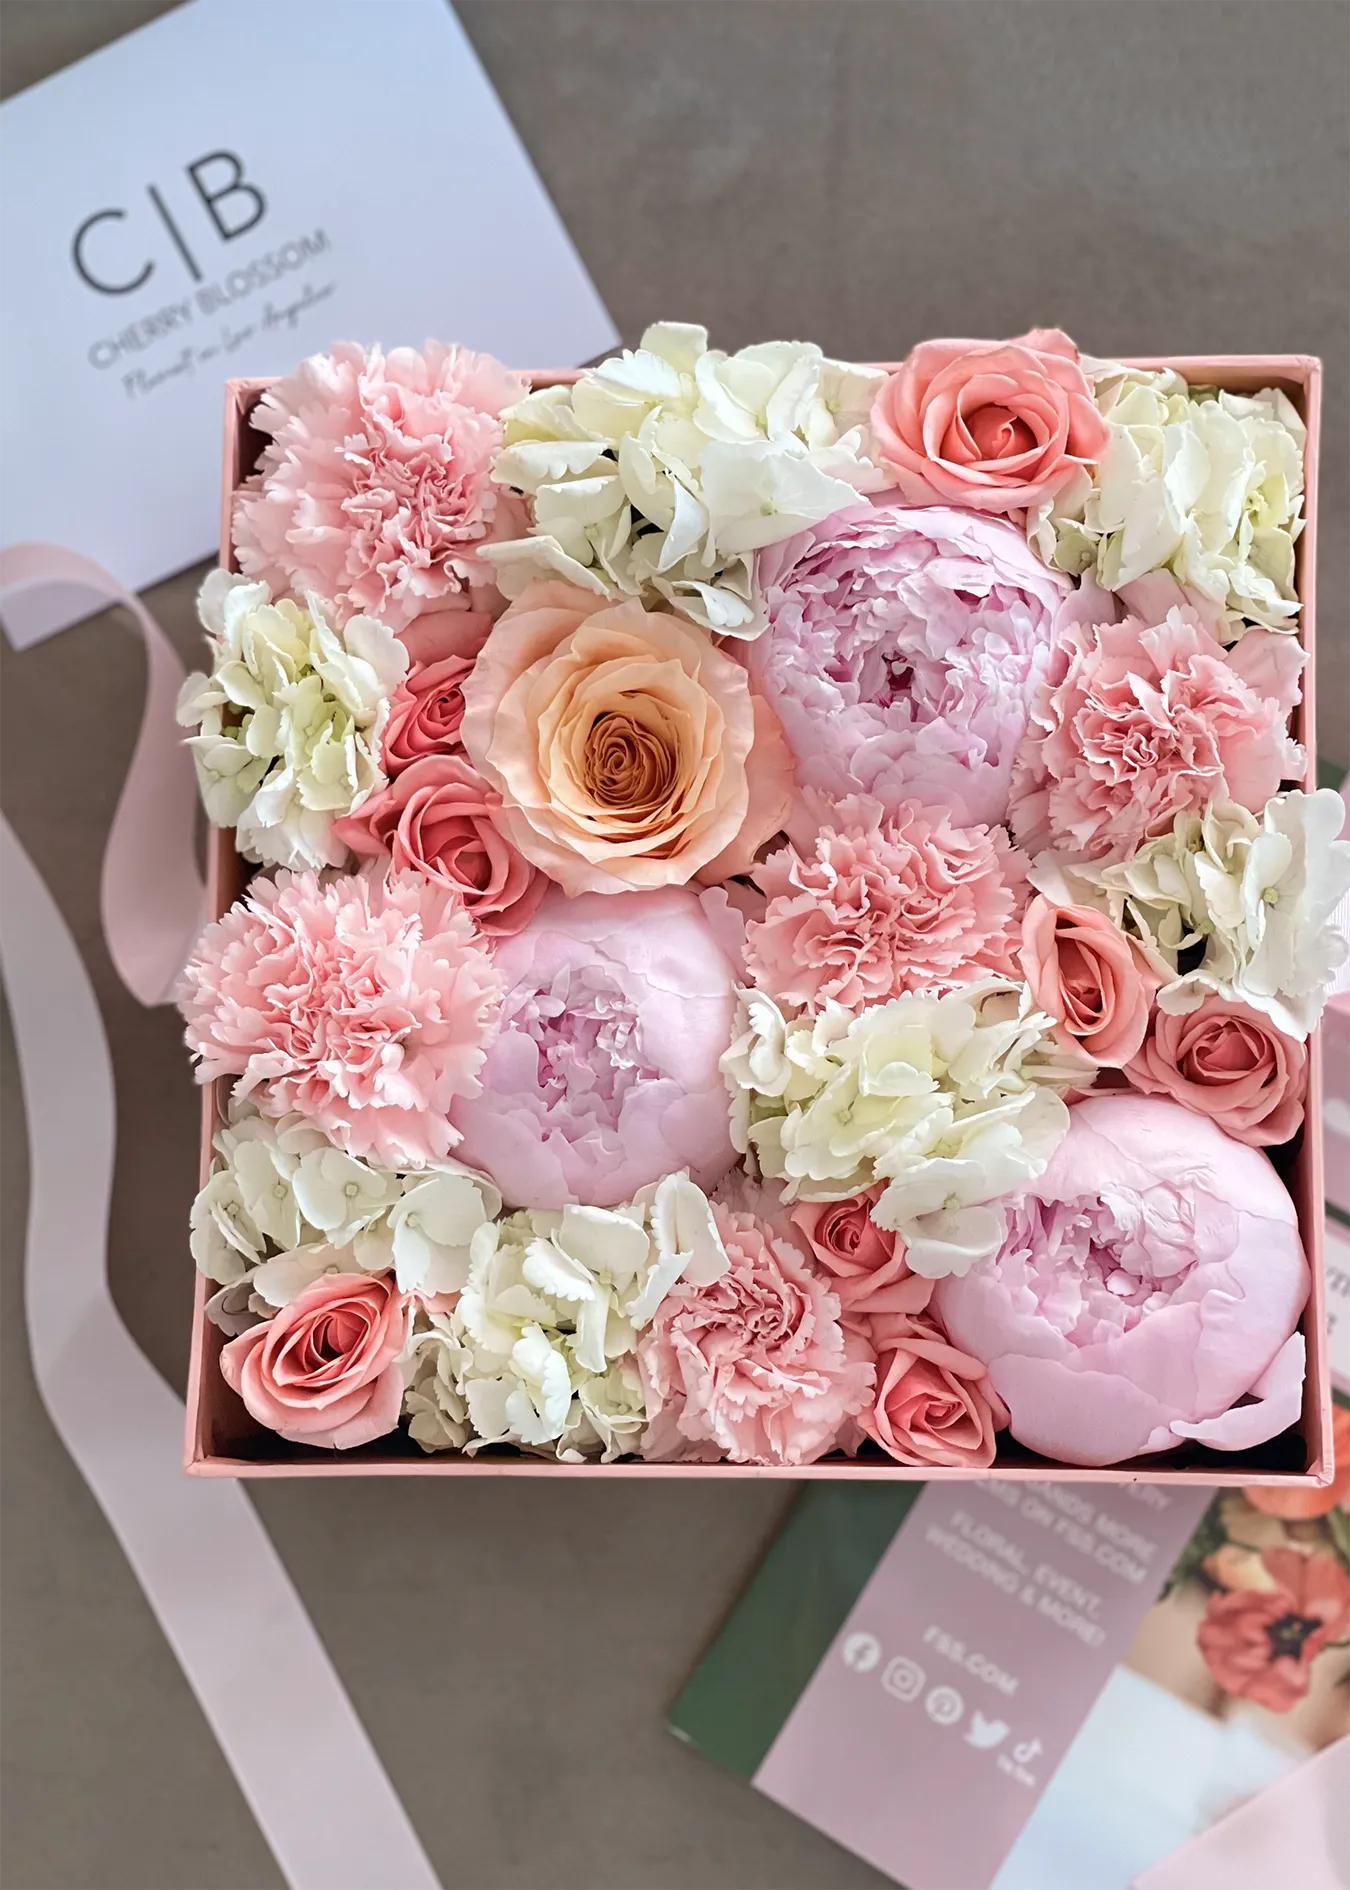 NO. 114. Square Box Rosy Blush Blooms (peonies, roses, dianthuses, hydrangeas)